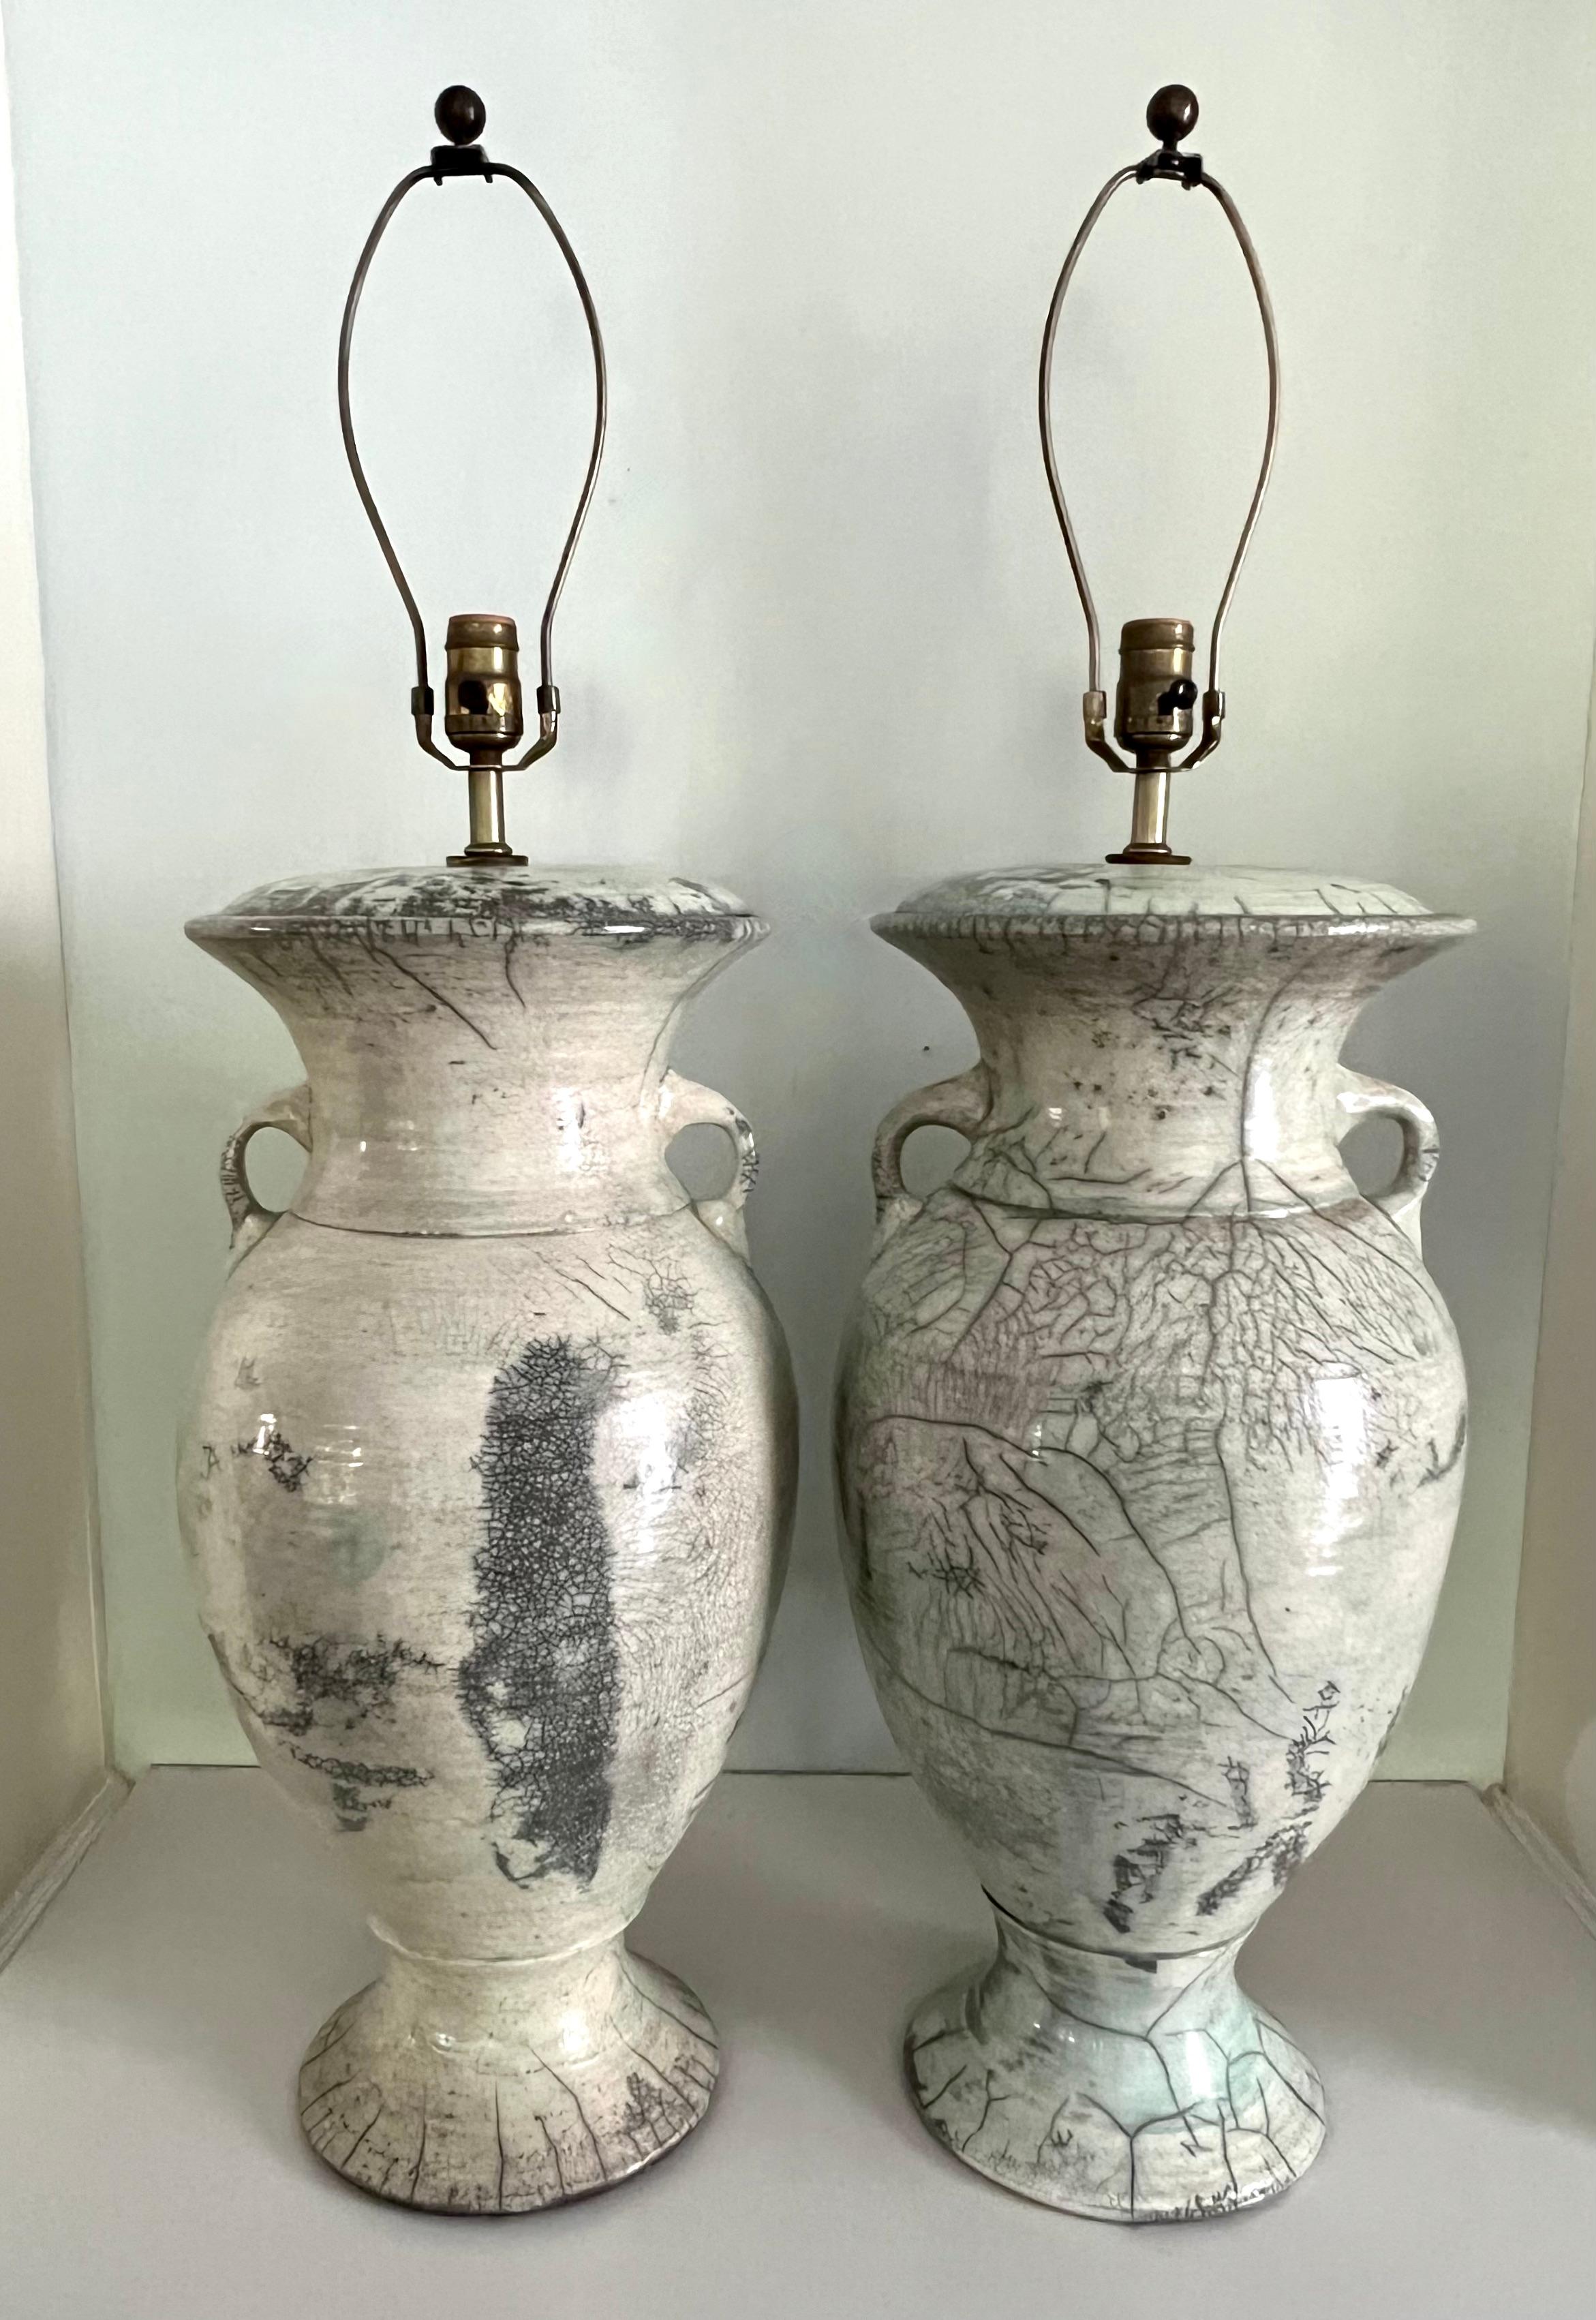 A phenmonal Pair of Japanese Raku Table Lamps. The urns have a 